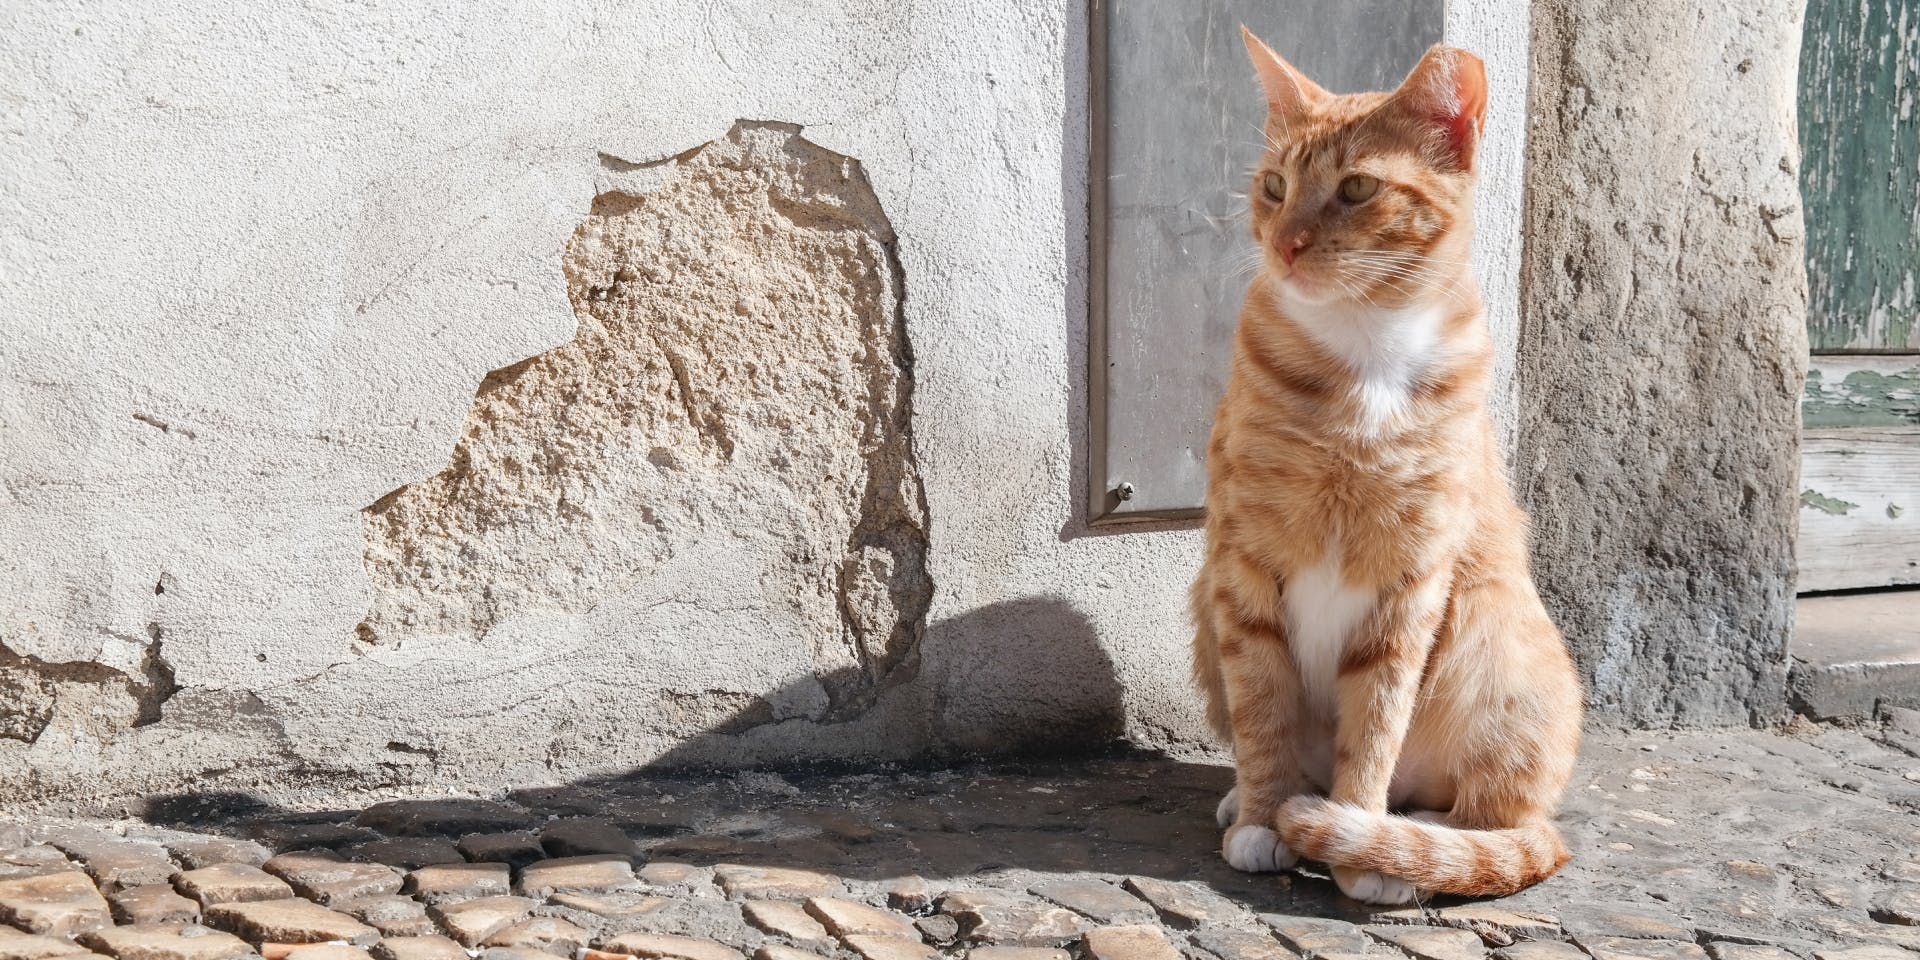 An orange cat on a cobbled street in the sun.